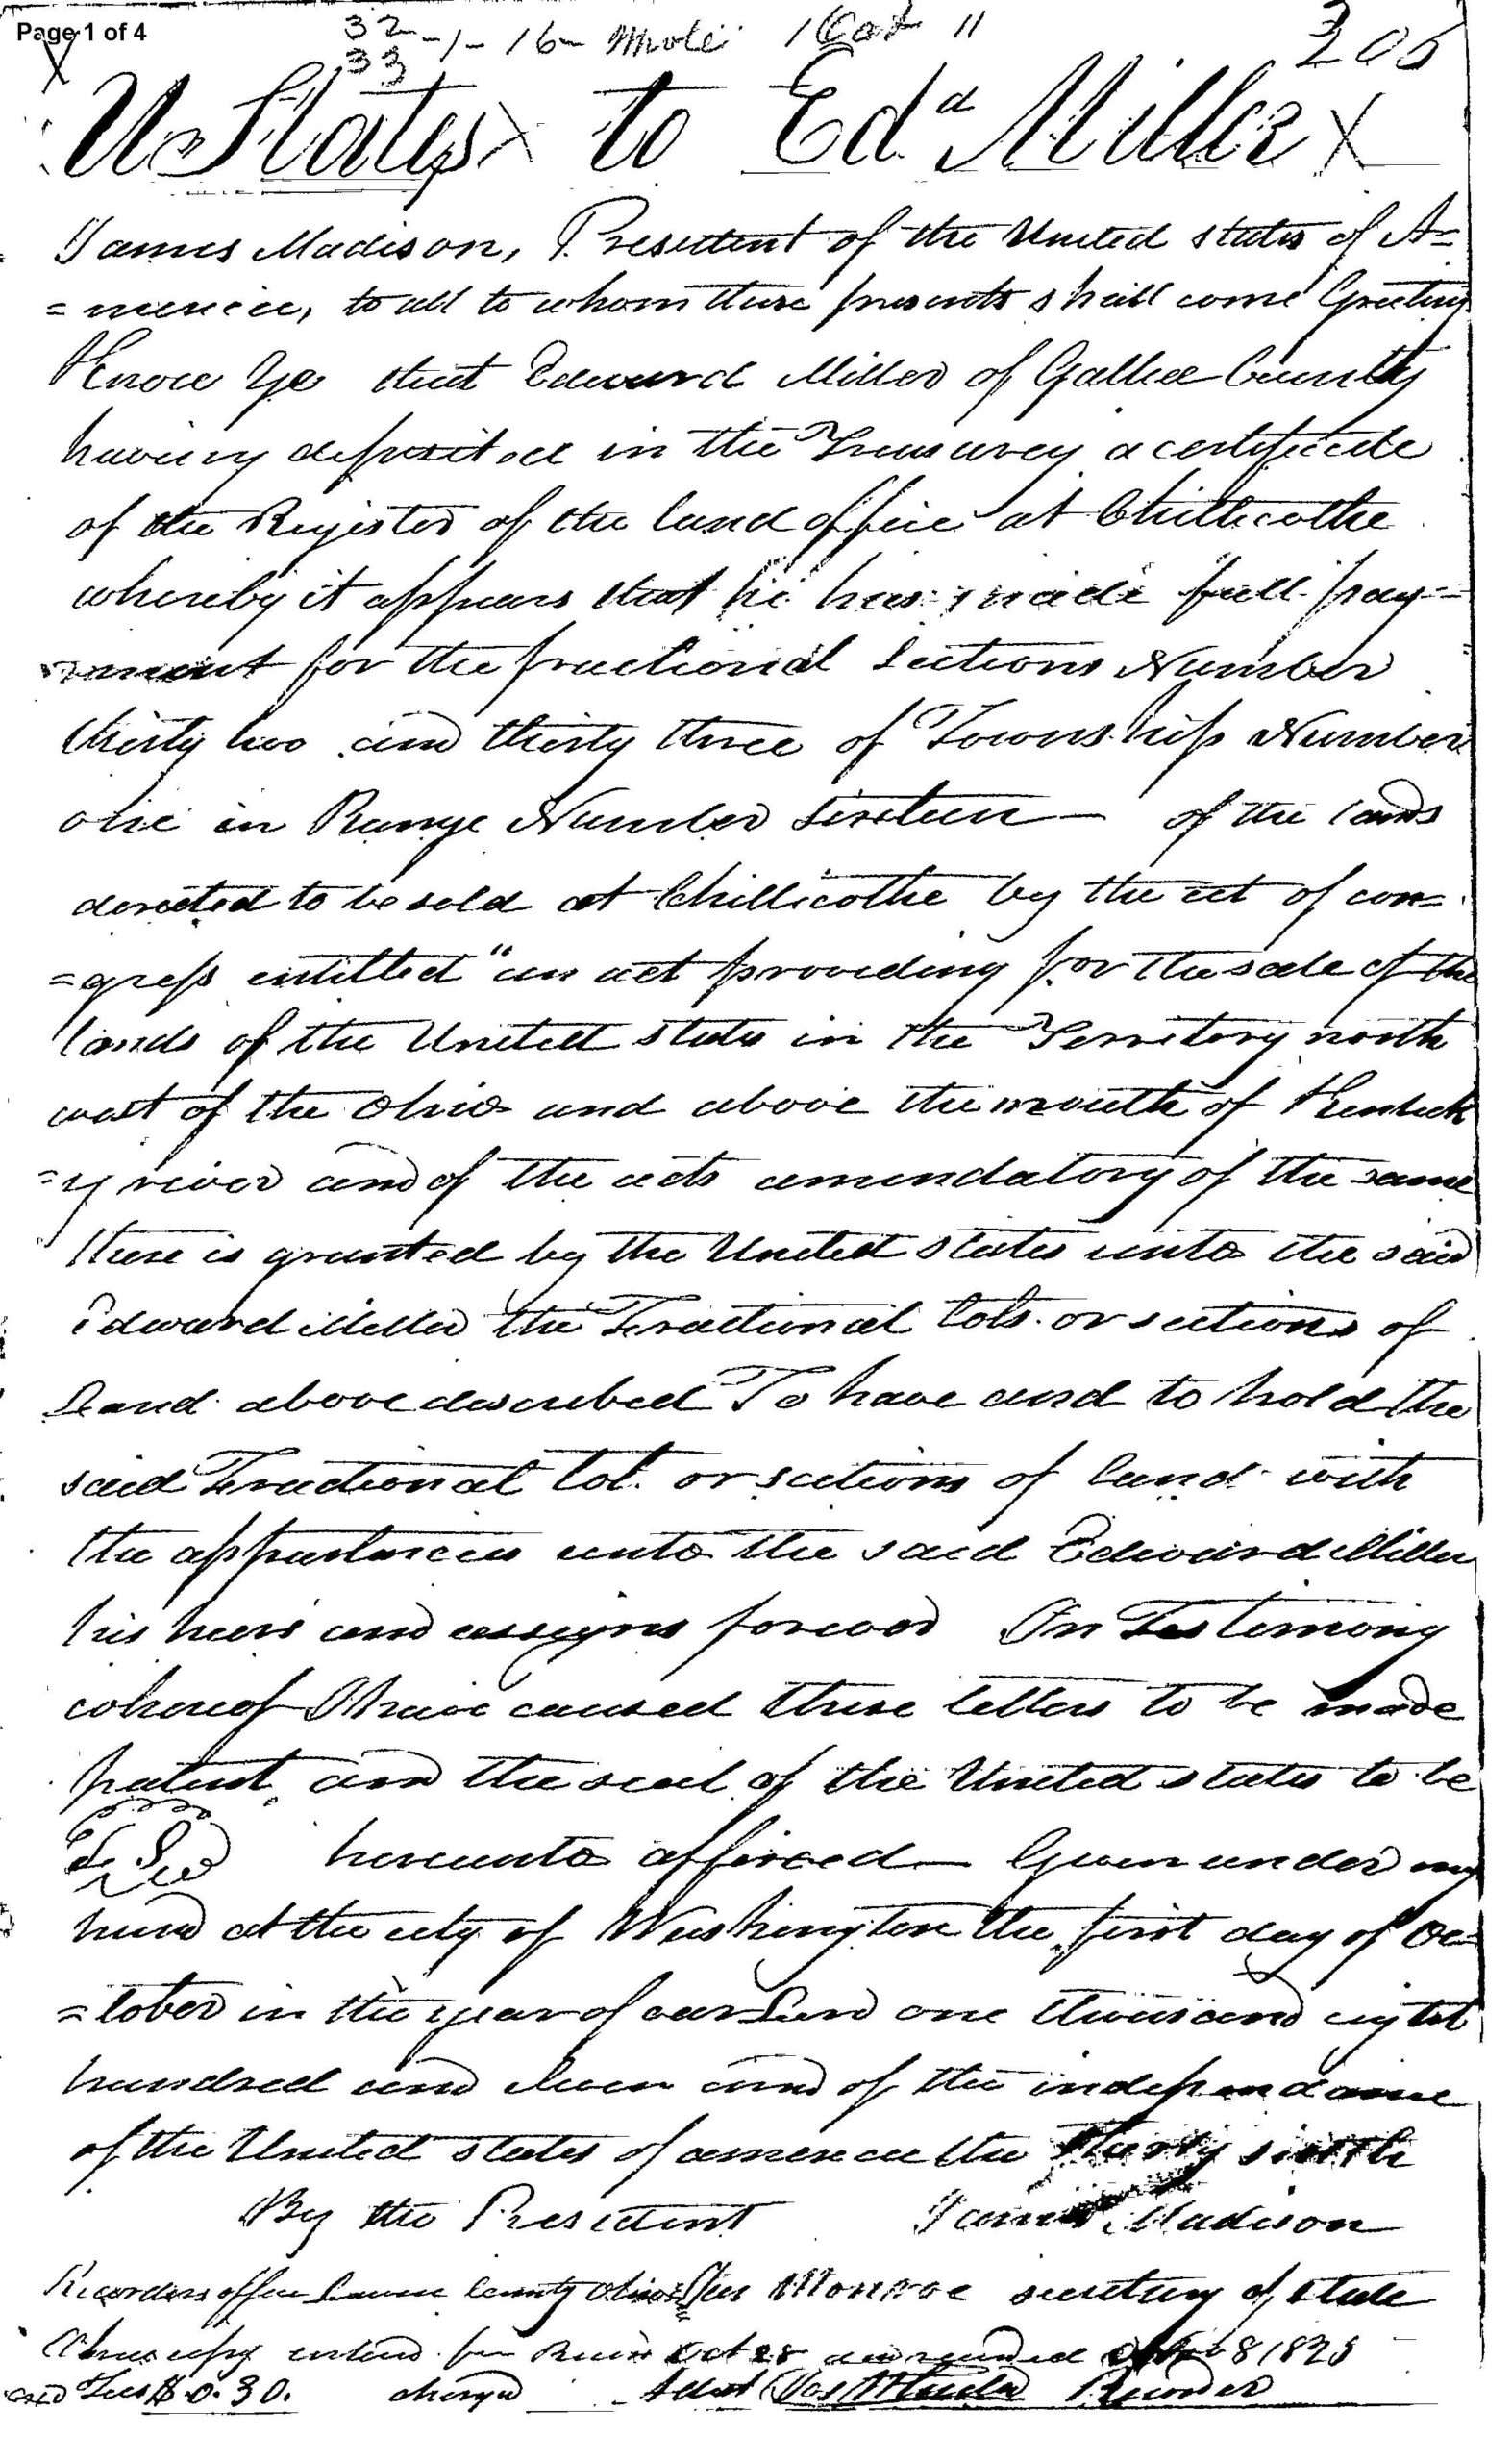 Edward Miller Land Patent Deed Book 4, page 307-310 Lawrence County, Ohio